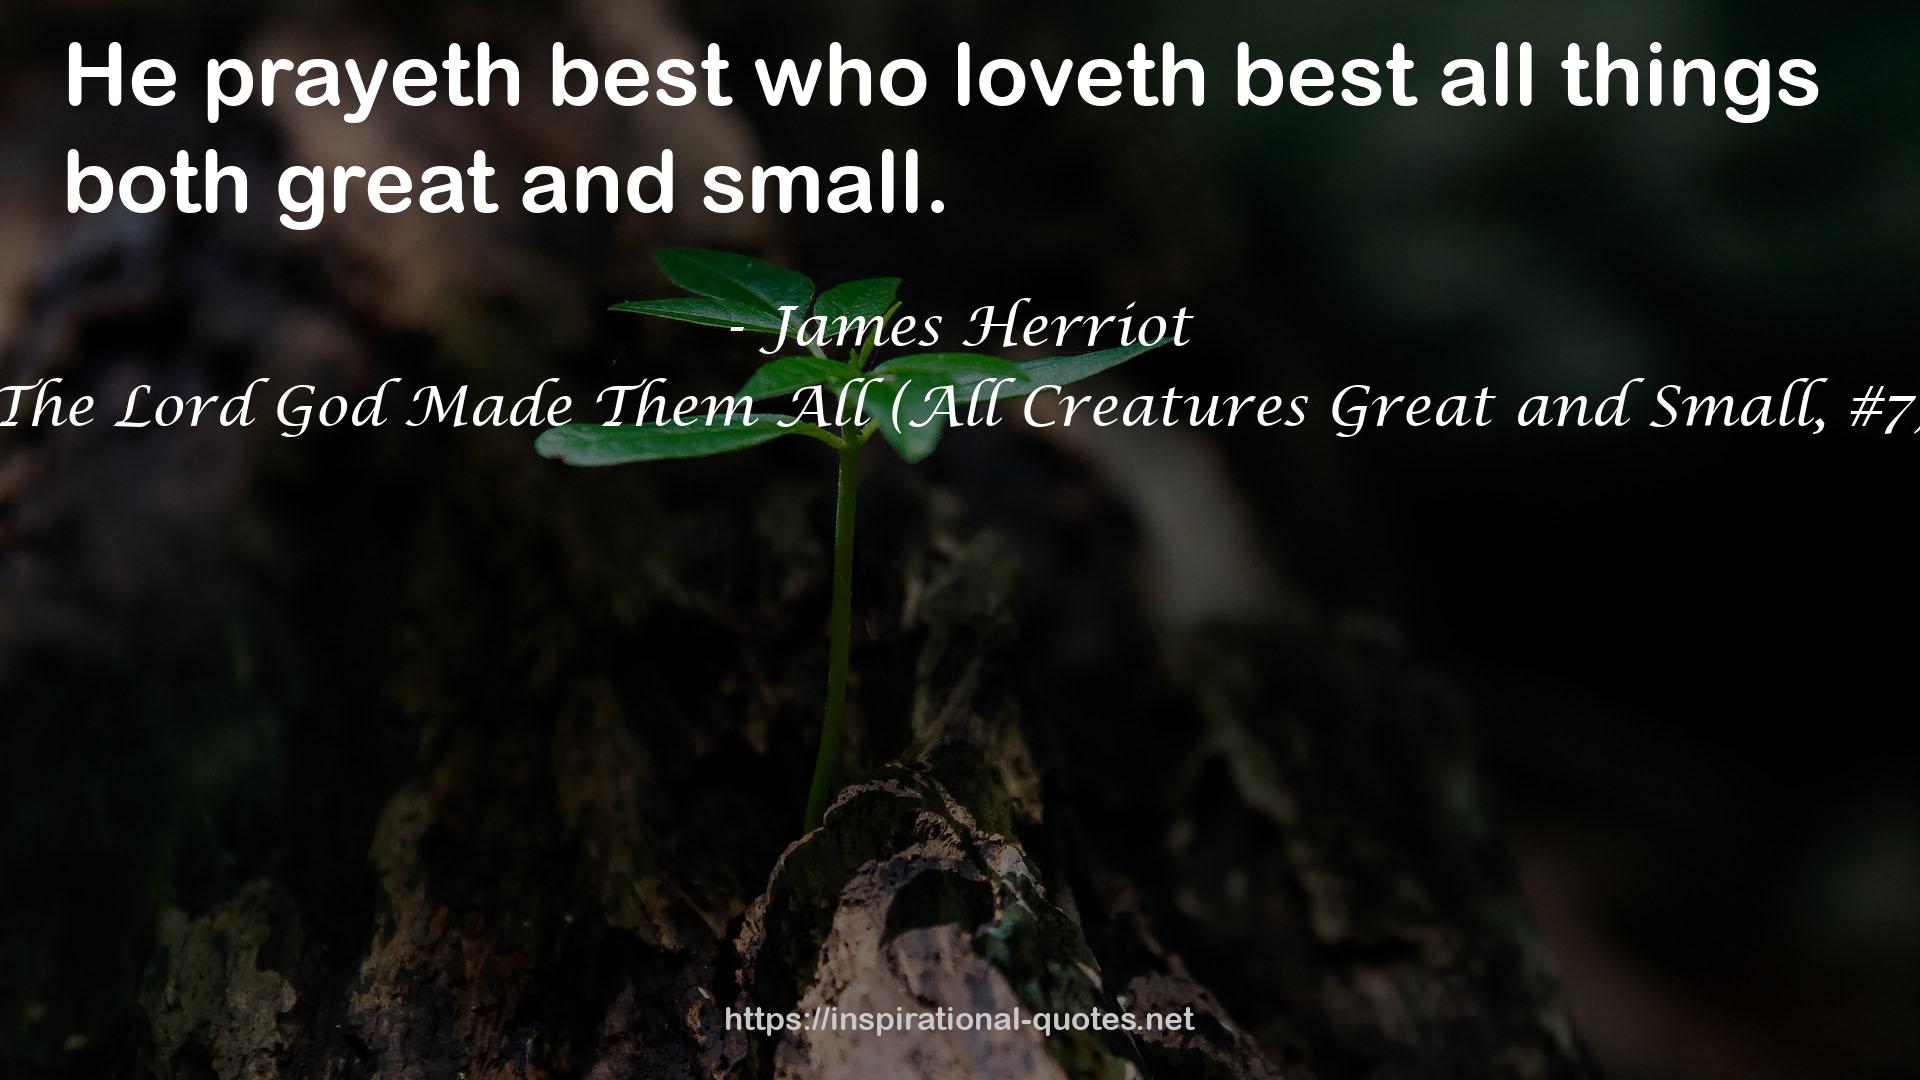 The Lord God Made Them All (All Creatures Great and Small, #7) QUOTES